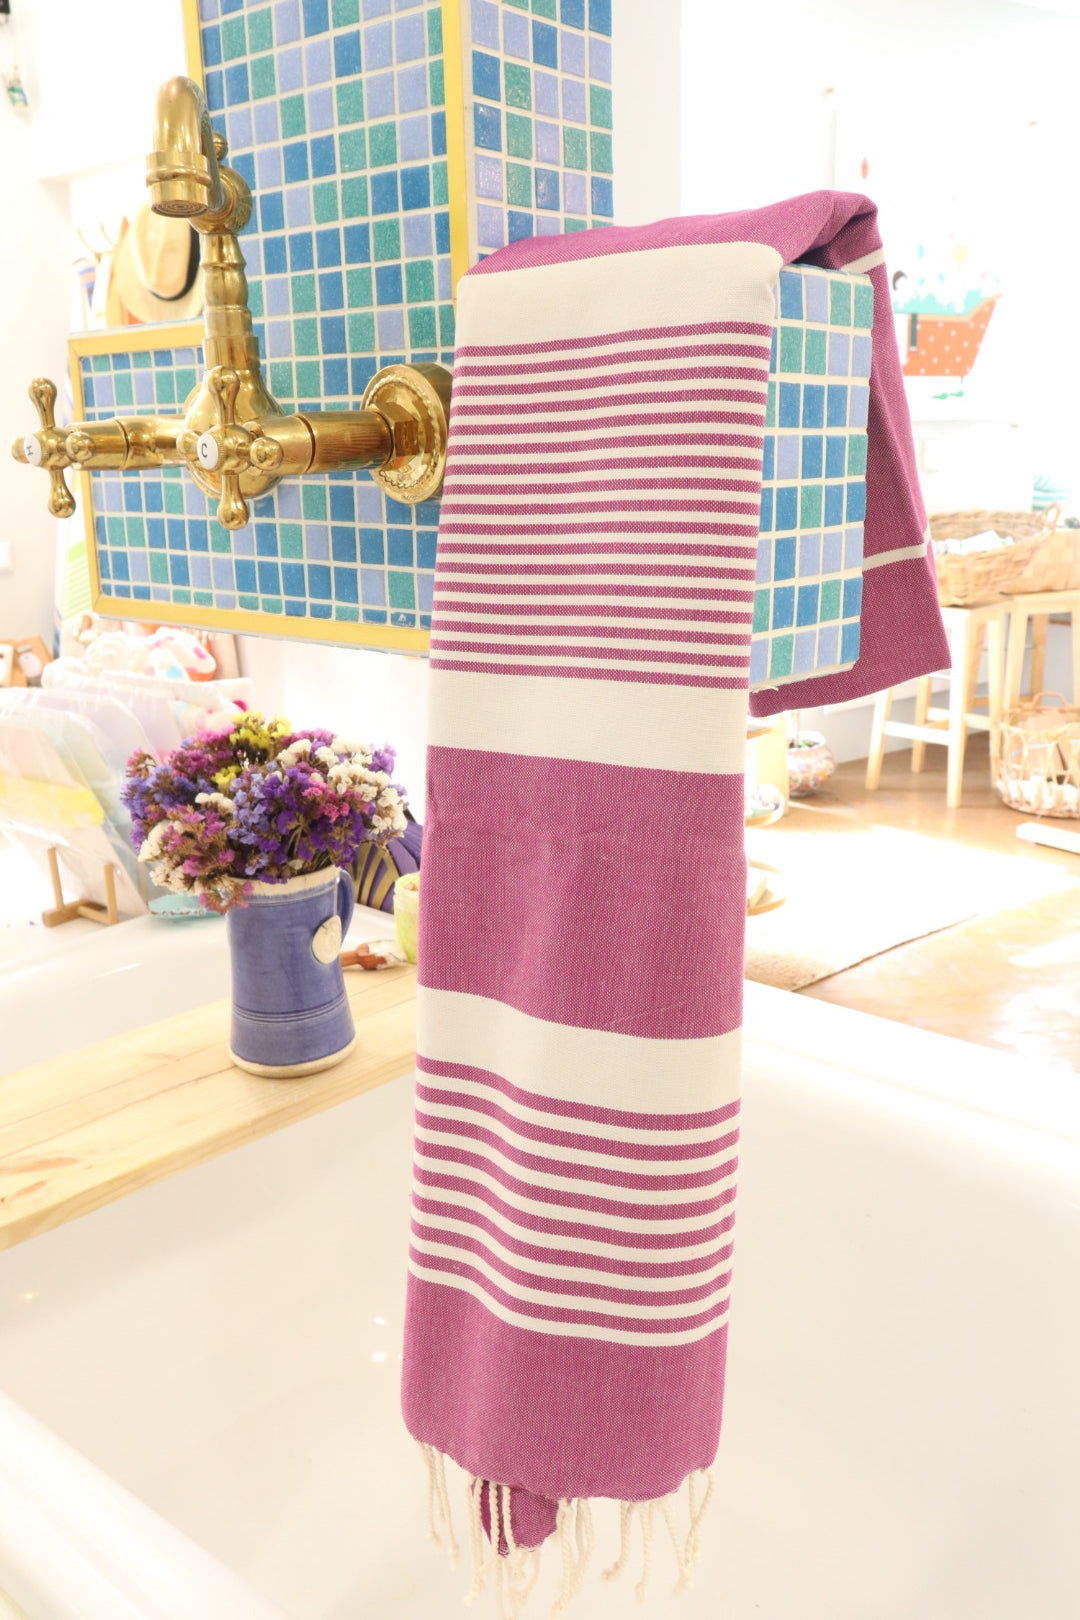 Imported Tunisian Bath and Beach Towels